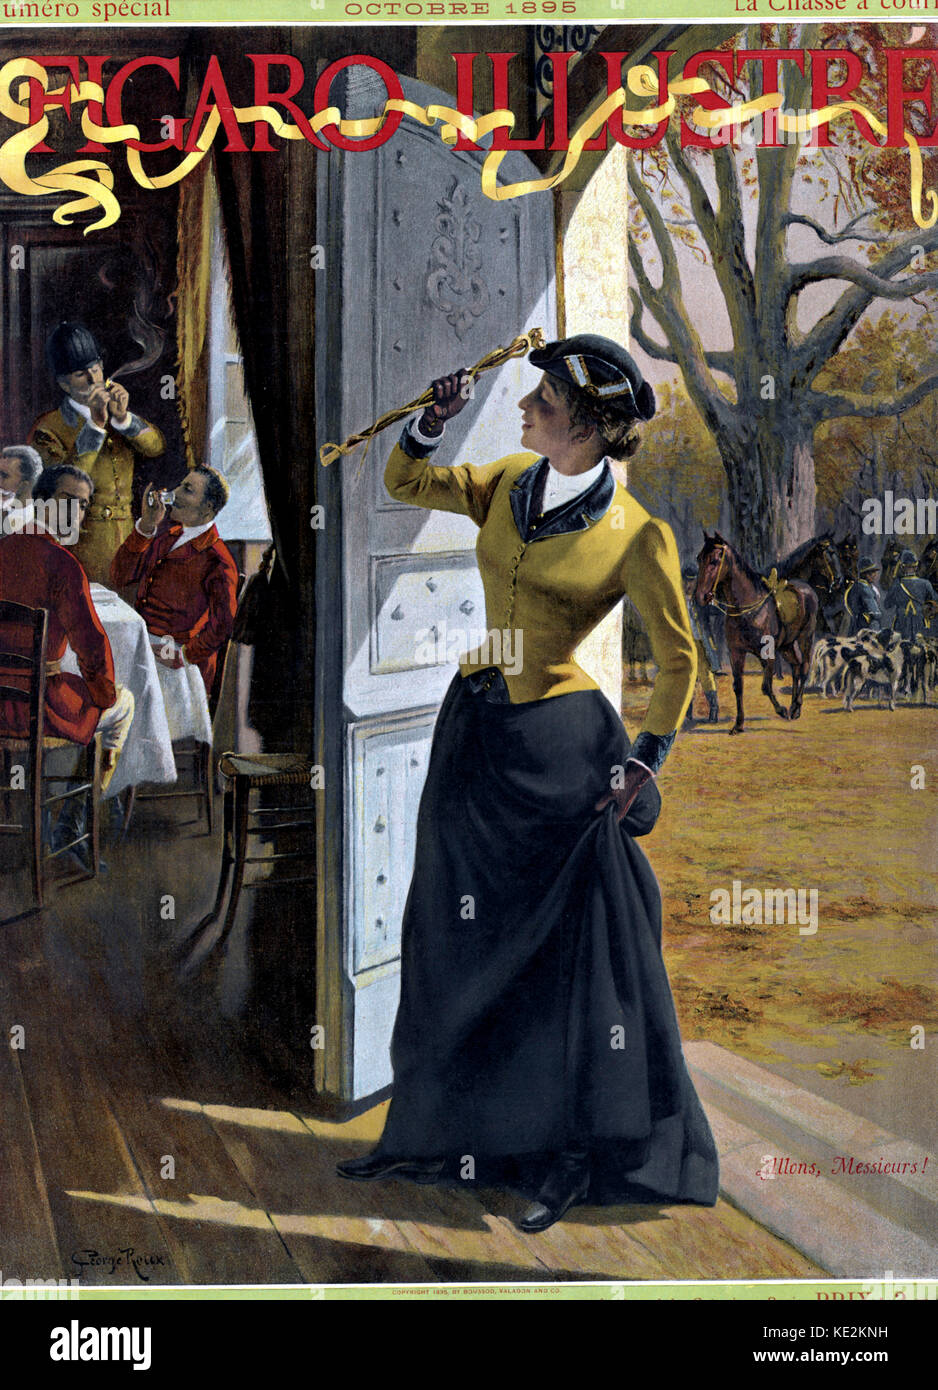 Young woman summoning hunters - Cover of Figaro Illustré, 'Numéro spécial - La Chasse à courre', October 1895. Horses and dogs waiting outside. Woman wearing hunting outfit with boots, gloves and hat. Illustration by George Roux 1853–1929. Caption reads 'Allons, Messieurs!' Stock Photo